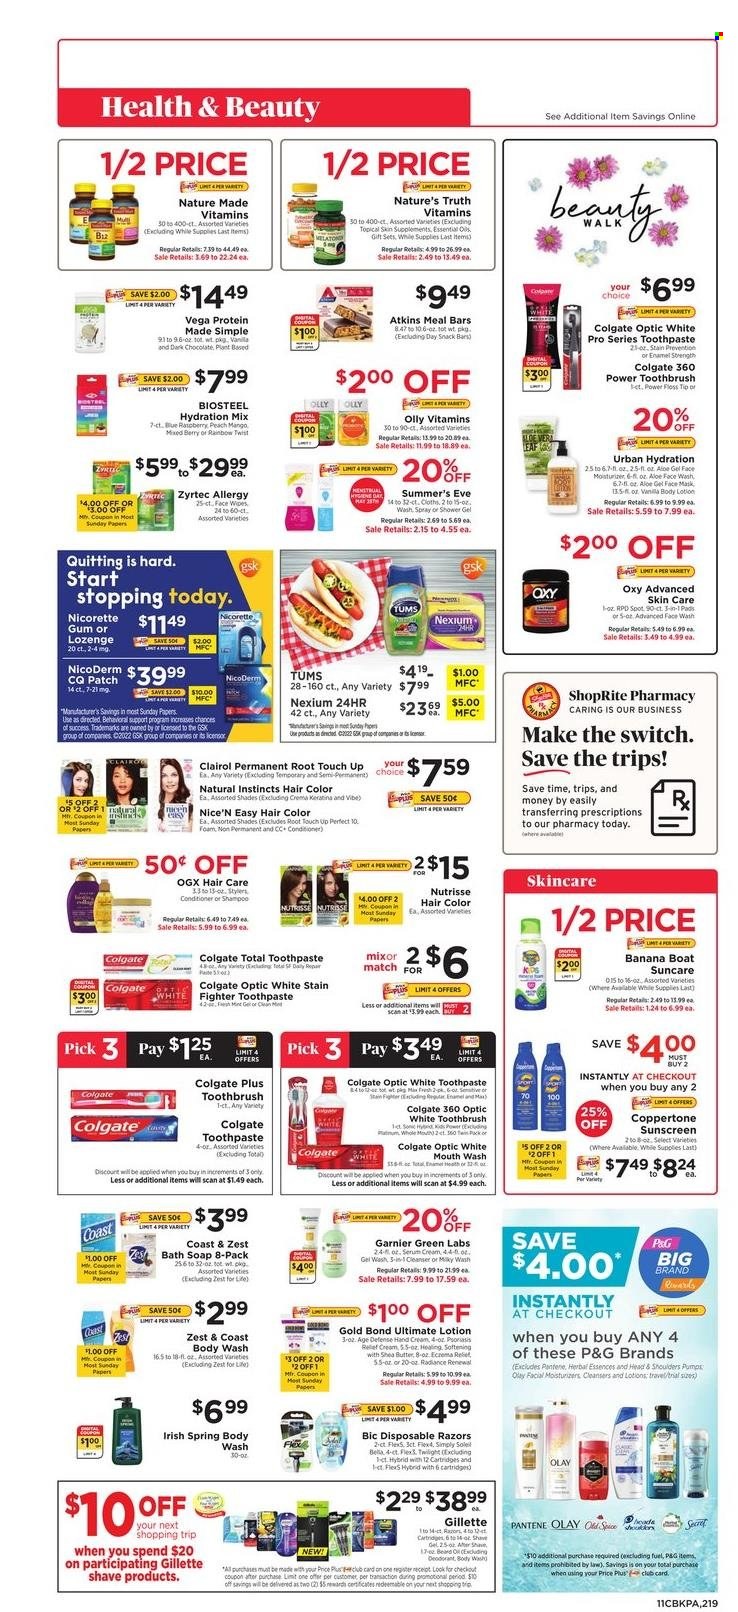 thumbnail - ShopRite Flyer - 05/22/2022 - 05/28/2022 - Sales products - chocolate, snack, dark chocolate, snack bar, spice, switch, wipes, body wash, shampoo, shower gel, Old Spice, face gel, soap, Colgate, toothbrush, toothpaste, cleanser, Garnier, moisturizer, serum, Olay, face mask, OGX, face wash, Clairol, conditioner, Head & Shoulders, Pantene, hair color, Herbal Essences, body lotion, shea butter, hand cream, anti-perspirant, deodorant, BIC, Gillette, disposable razor, Nature Made, Nature's Truth, NicoDerm, Nicorette, Zyrtec, Nexium. Page 11.